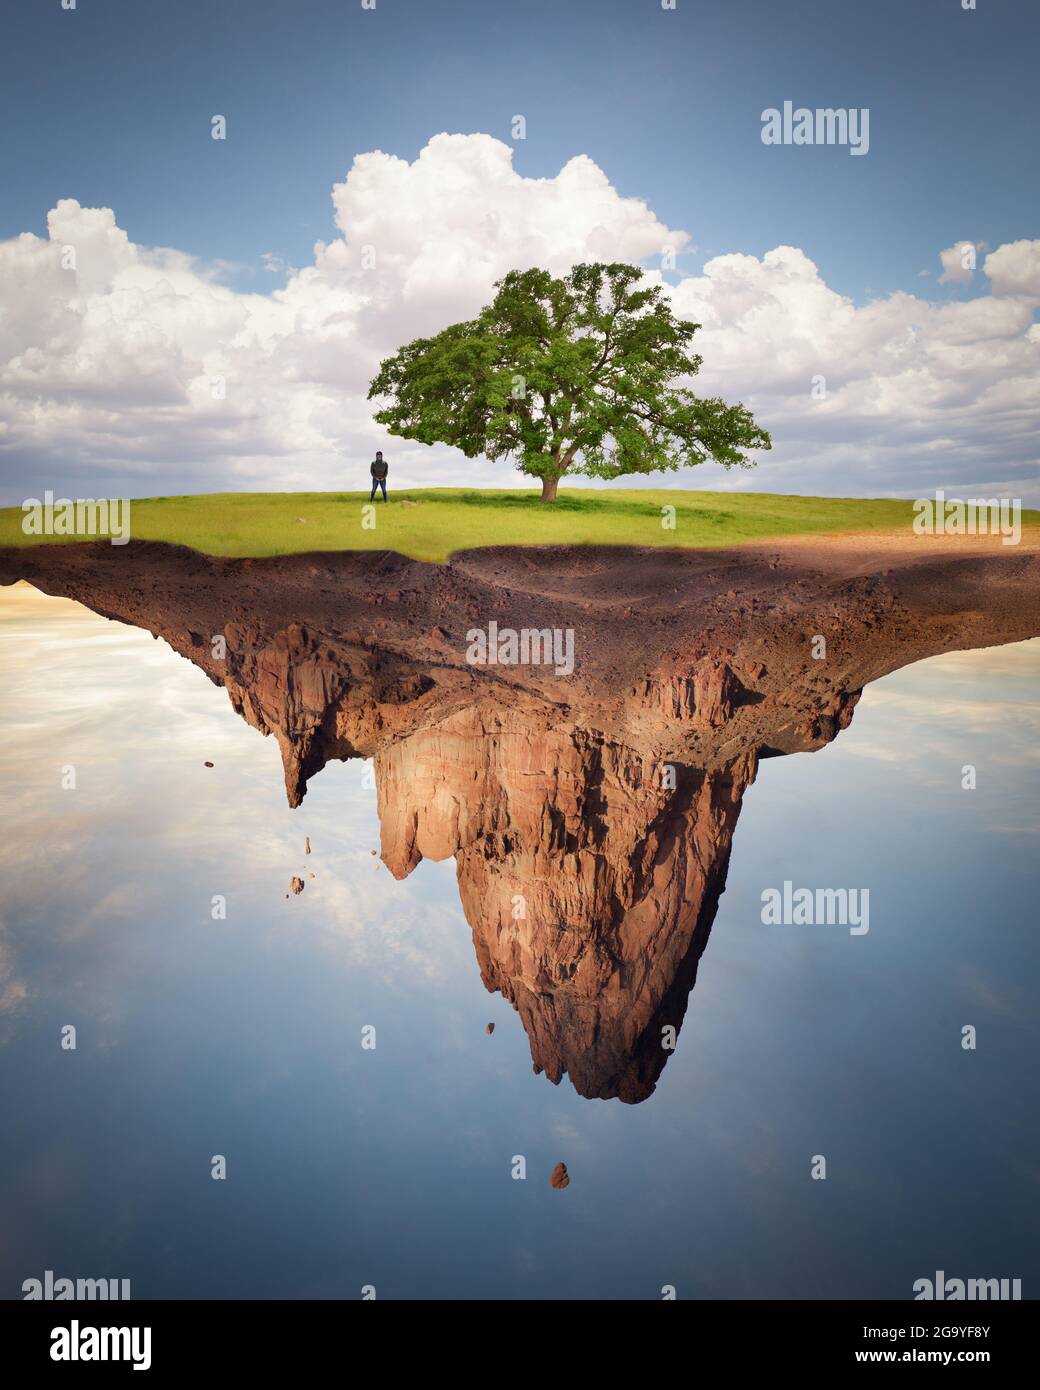 Man standing under a tree on a floating plot of land, USA Stock Photo